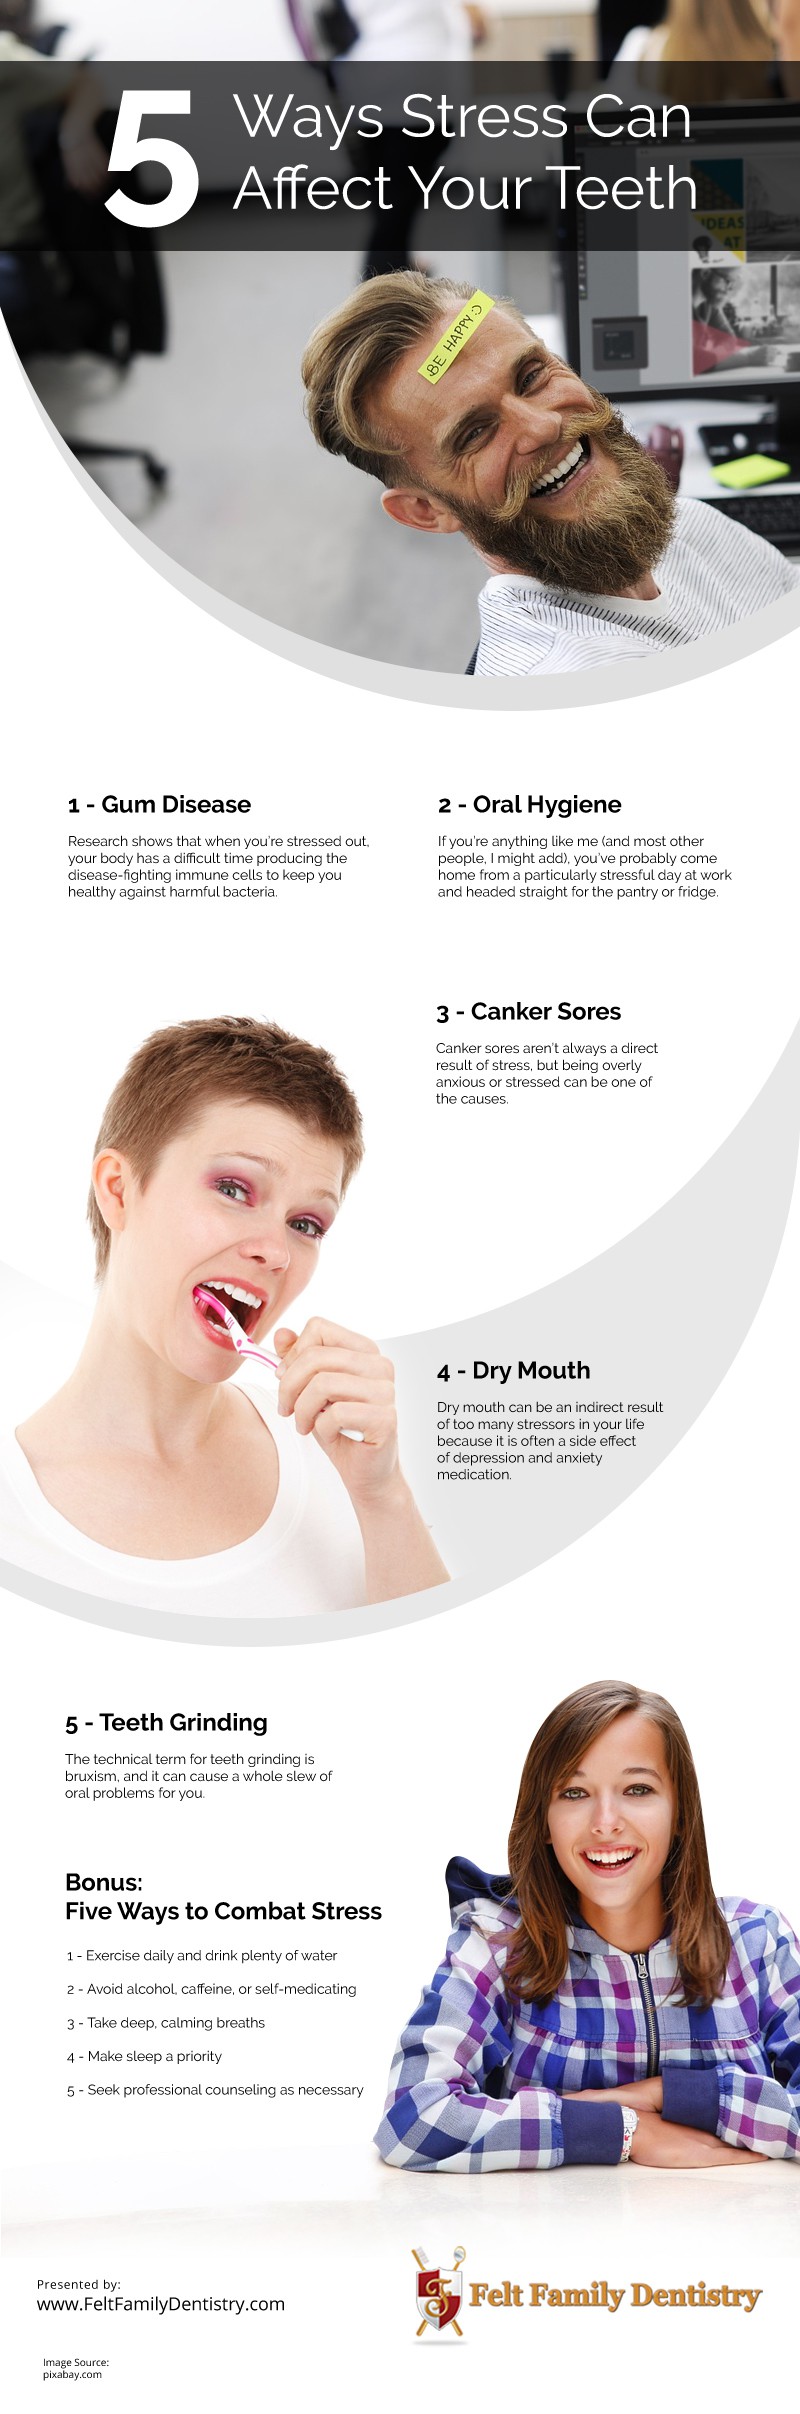 5 Ways Stress Can Affect Your Teeth [infographic]